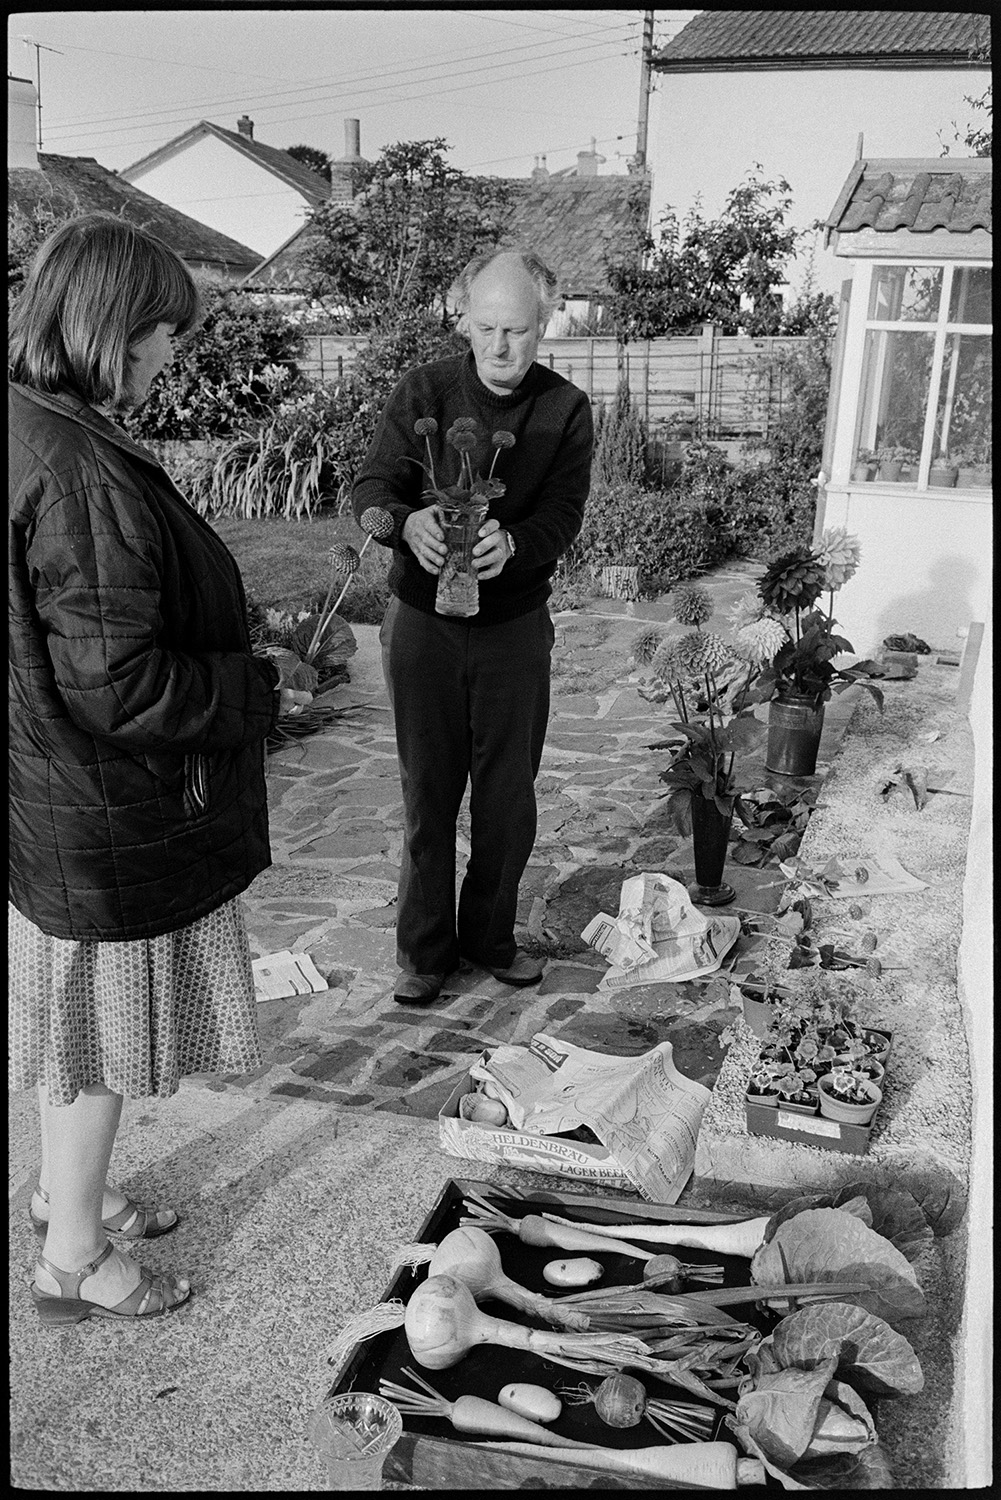 Preparing vegetables and flowers, flower show in garden with greenhouse. 
[Michael Mitchell and Rose Mitchell preparing entries for Dolton Flower Show in the garden at Pear Tree Cottage, Aller Road, Dolton. Vases of dahlias and a box of vegetables, including onions, parsnips and potatoes, can be seen.]